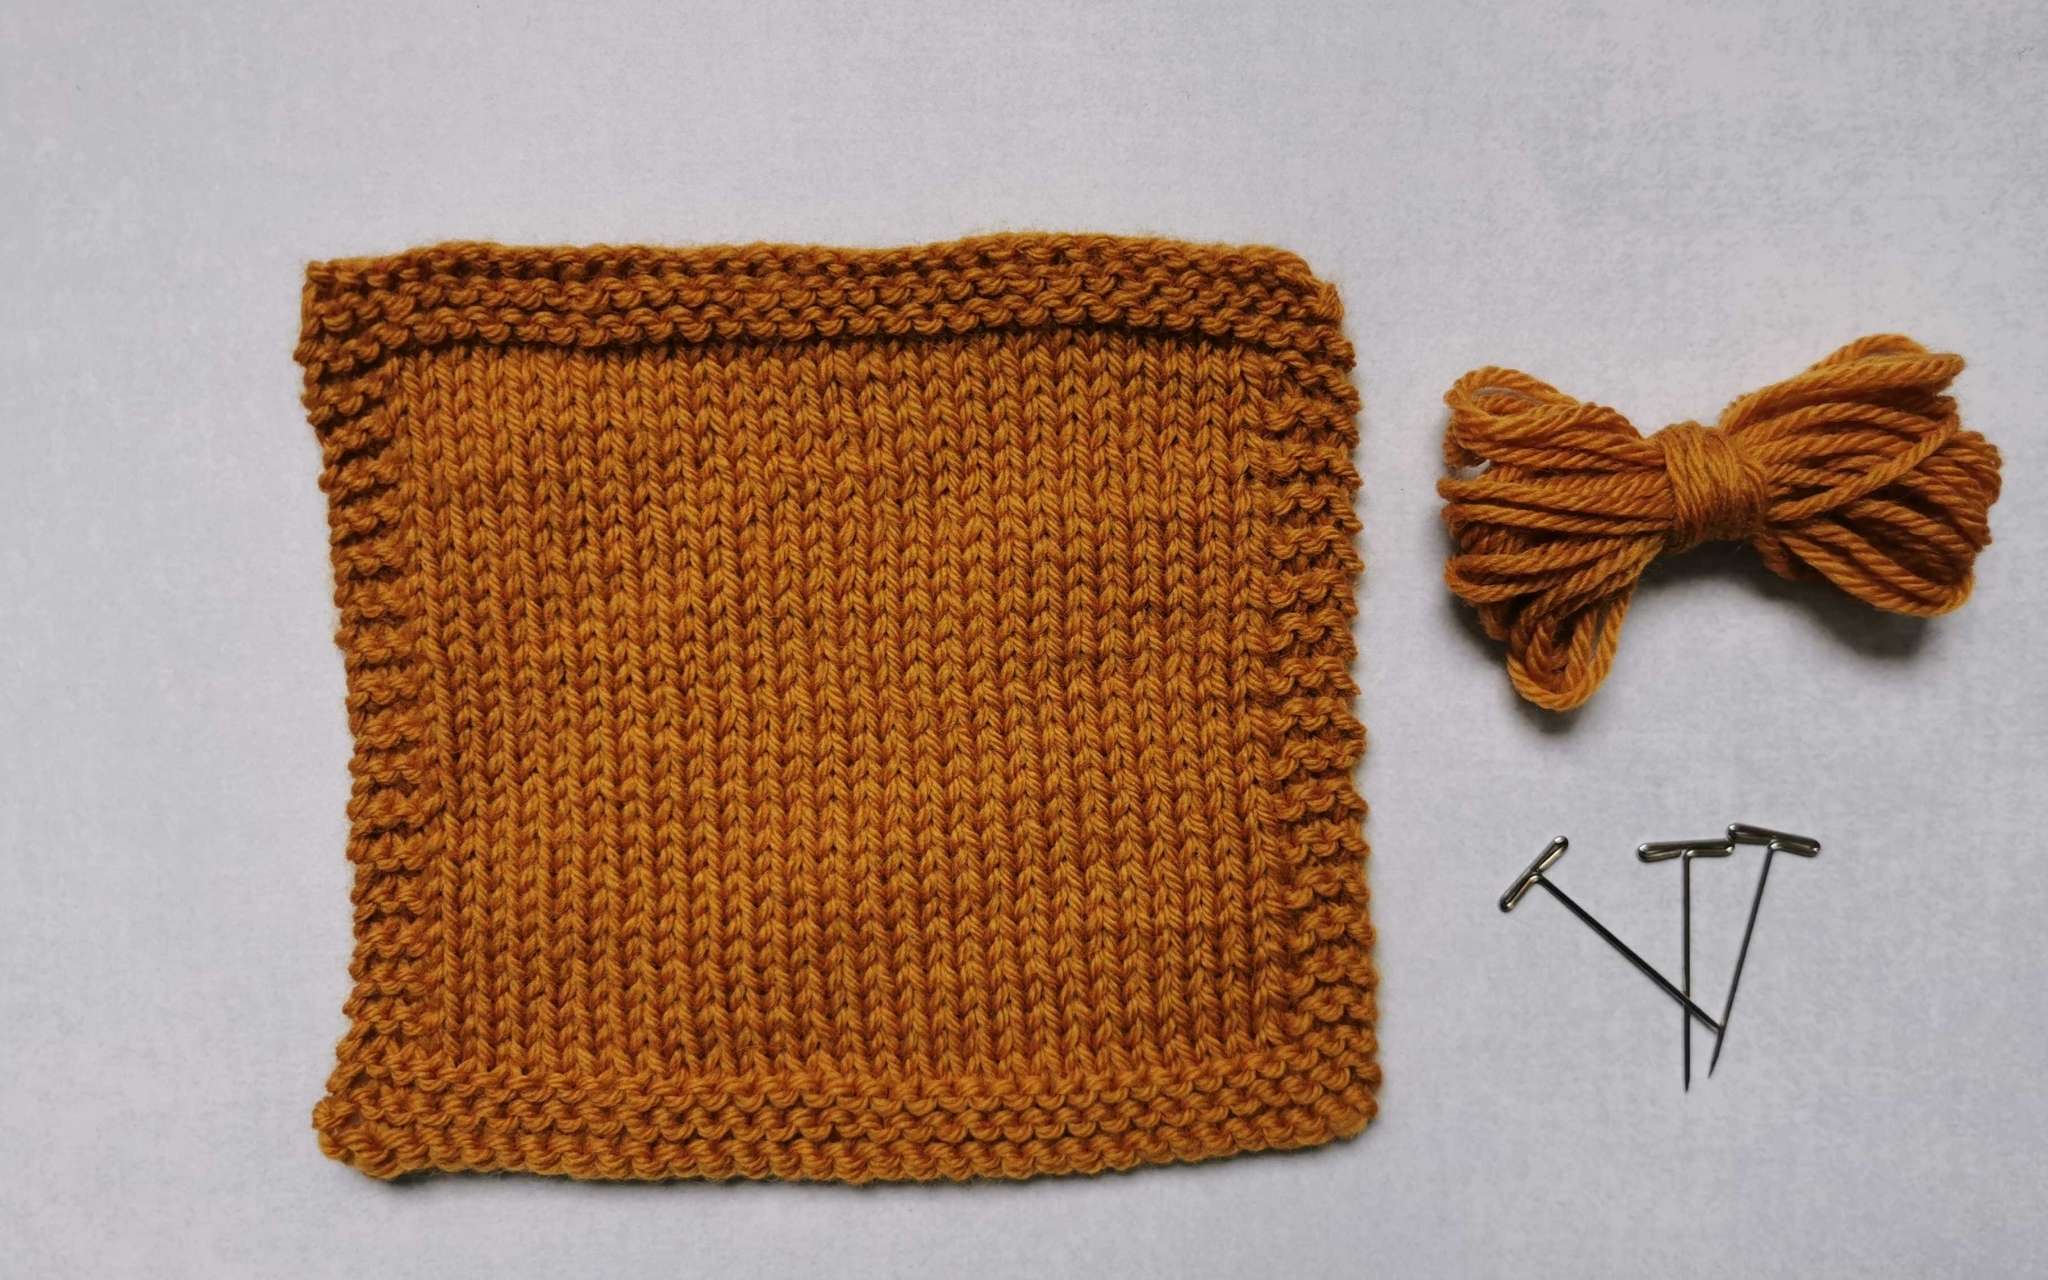 A square swatch of stocking stitch in golden yellow, with some bundled up spare yarn and t-pins laying beside it to the right.